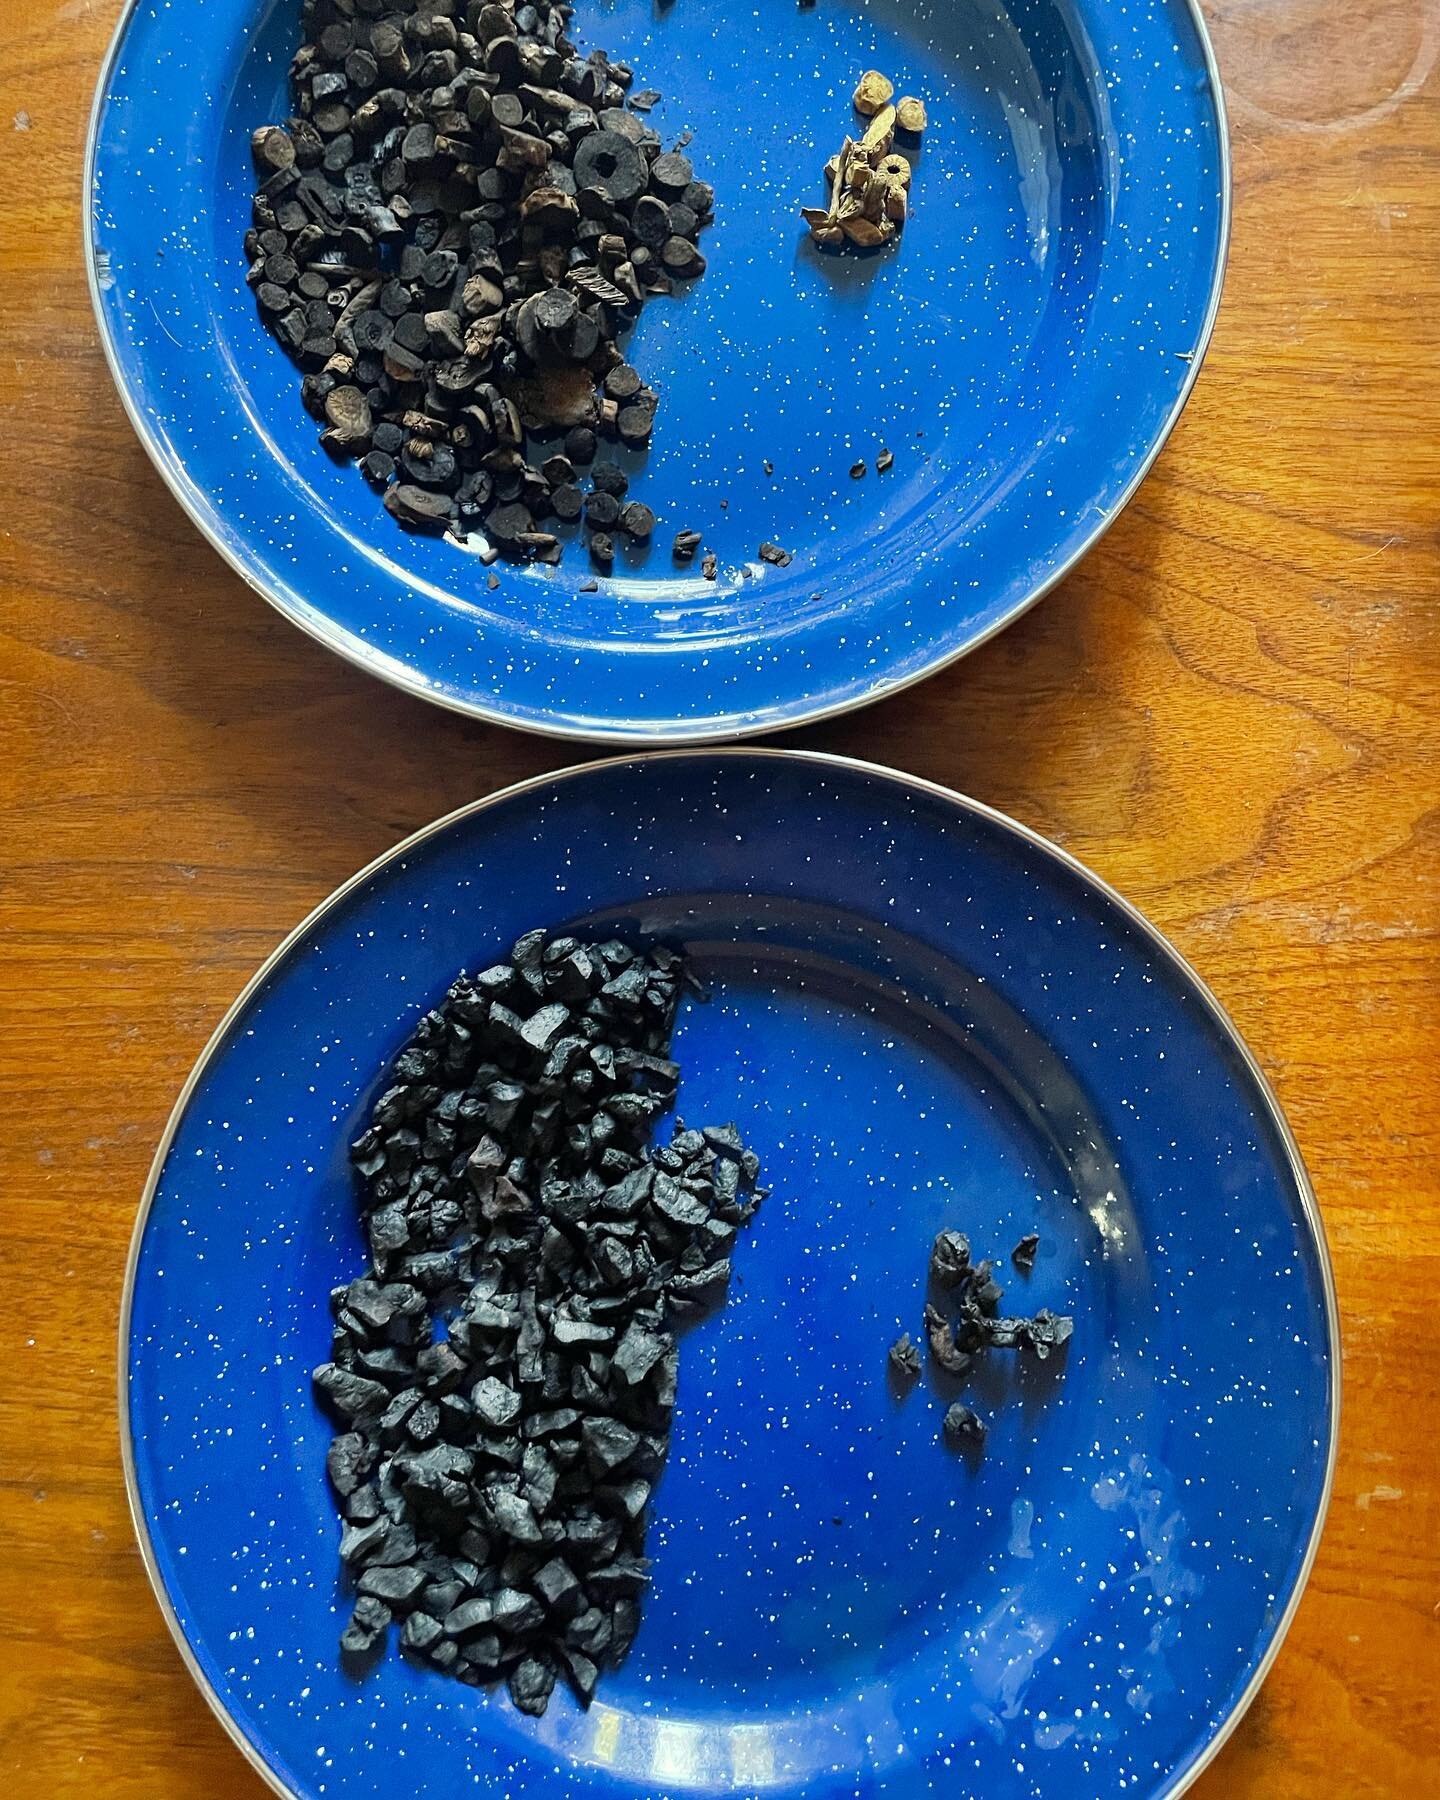 Charring herbs makes them more styptic.  Here are huang qin (top) and sheng di (bottom) charred.  On the right you see the herb before charring.

Huang qin clears heat by opening pivots in the body that let our own life force move through them.  Shen